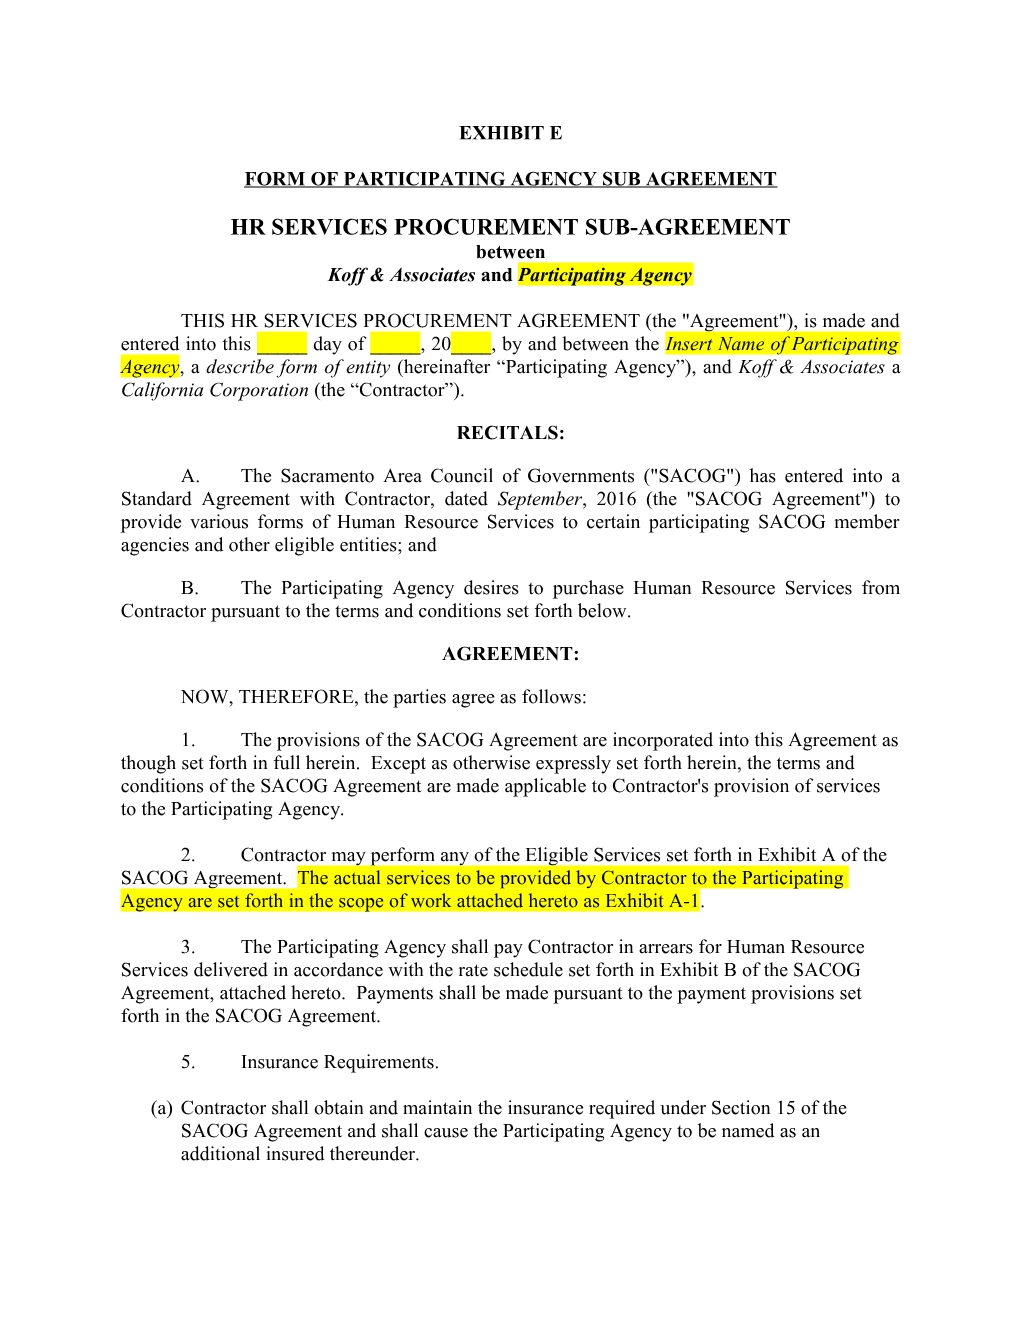 Form of Participating Agency Sub Agreement